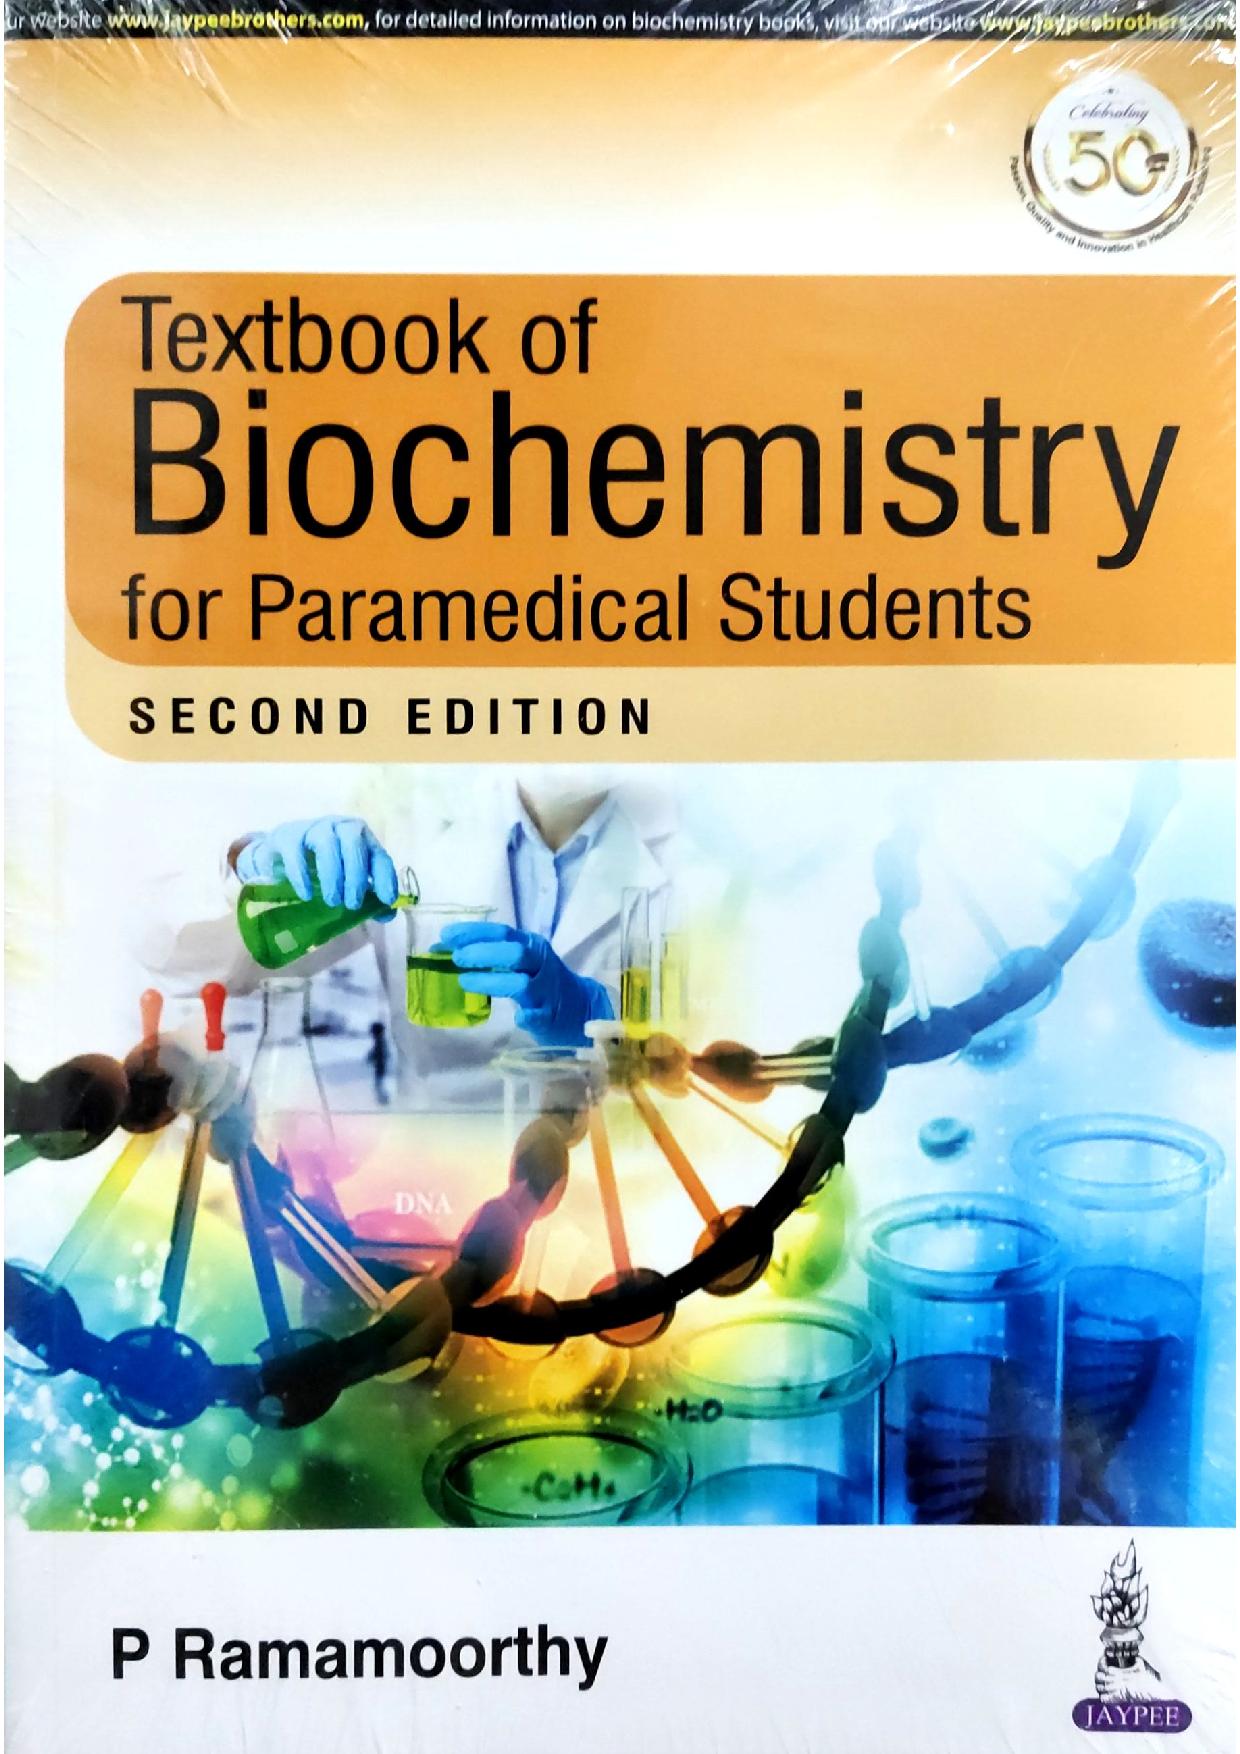 textbook-of-biochemistry-for-paramedical-2e